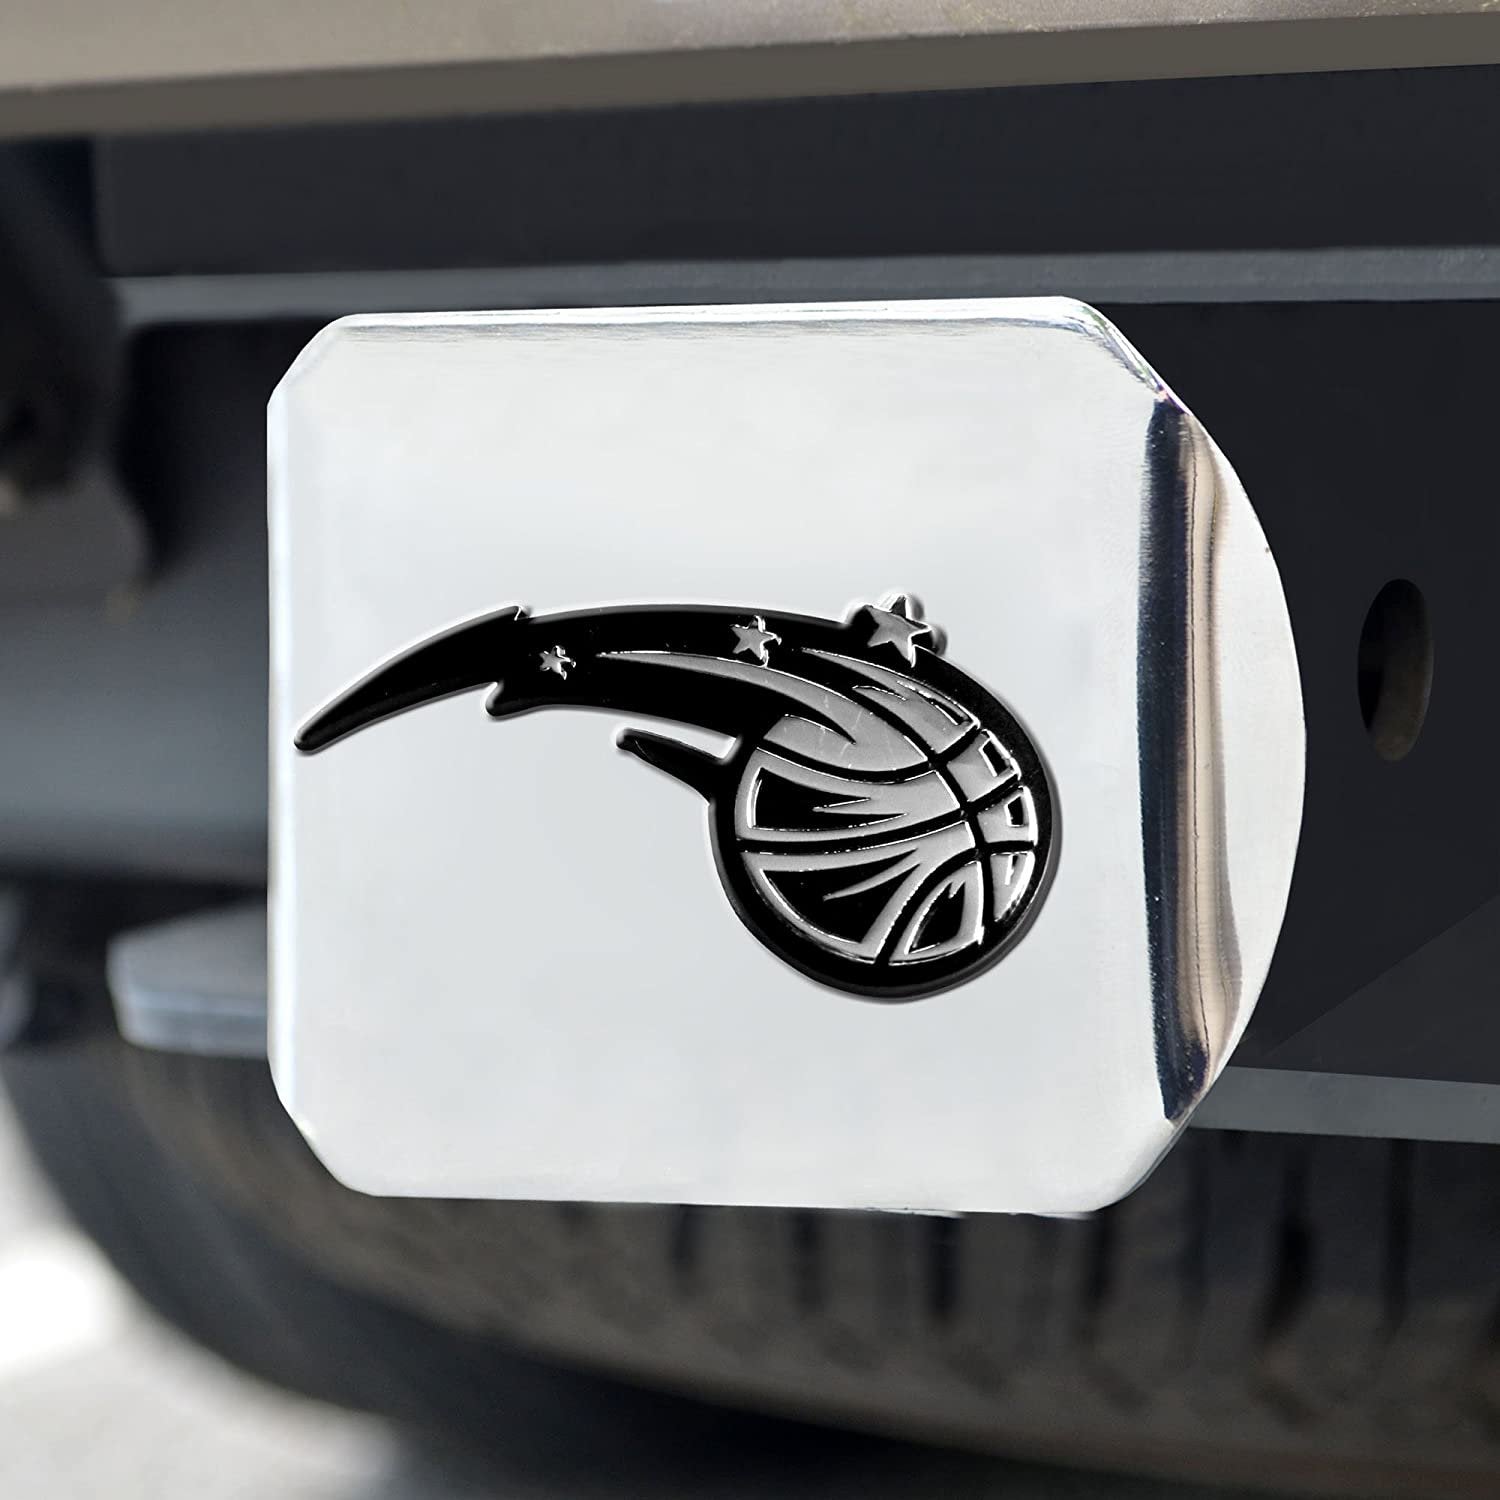 Orlando Magic Hitch Cover Solid Metal with Chrome Metal Emblem 2" Square Type III